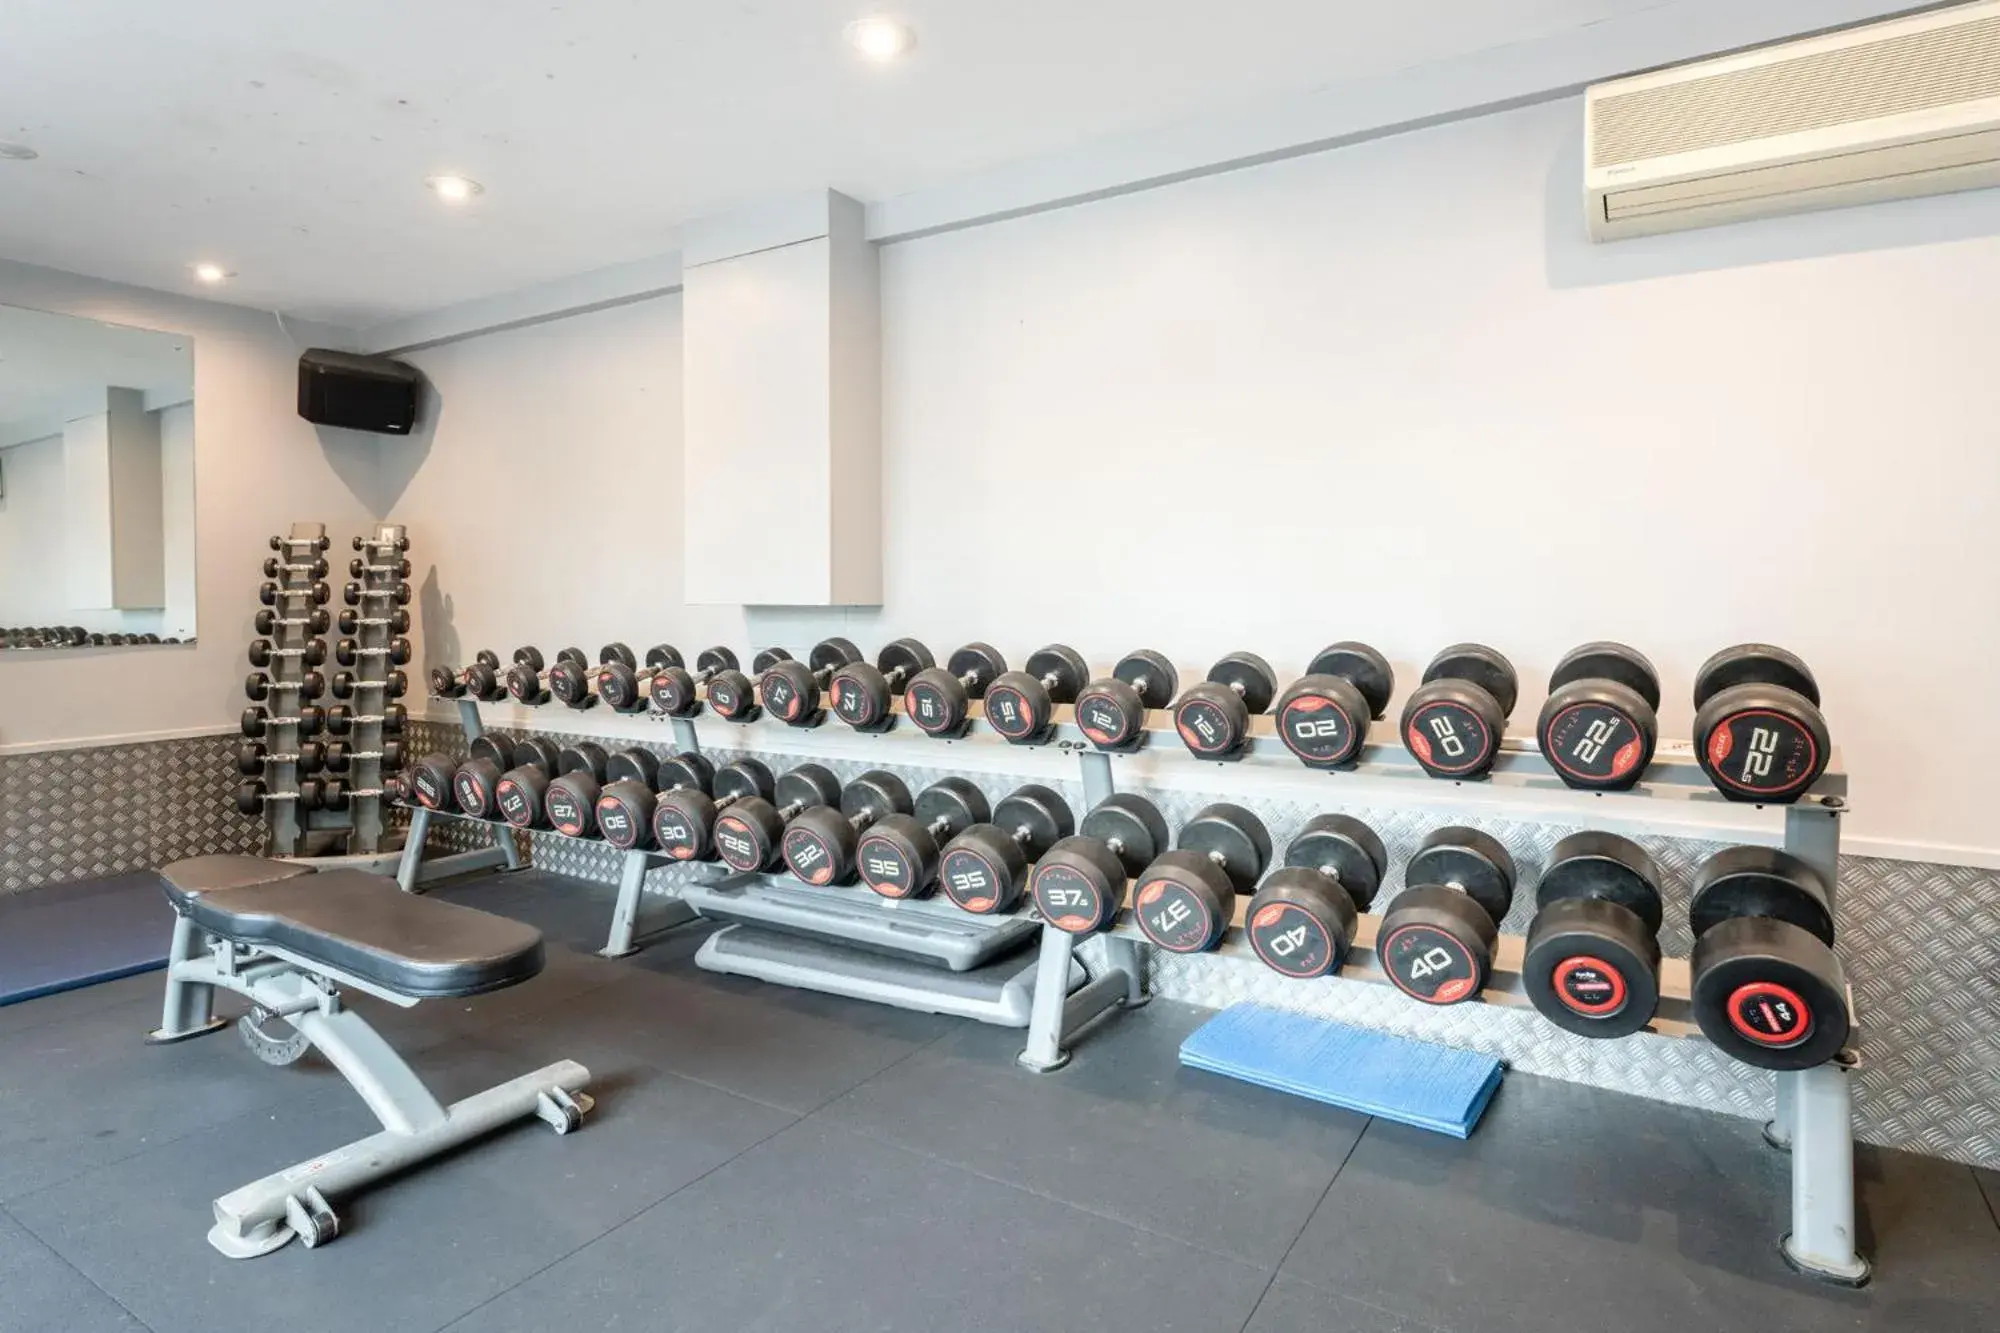 Fitness centre/facilities, Fitness Center/Facilities in Ardencote